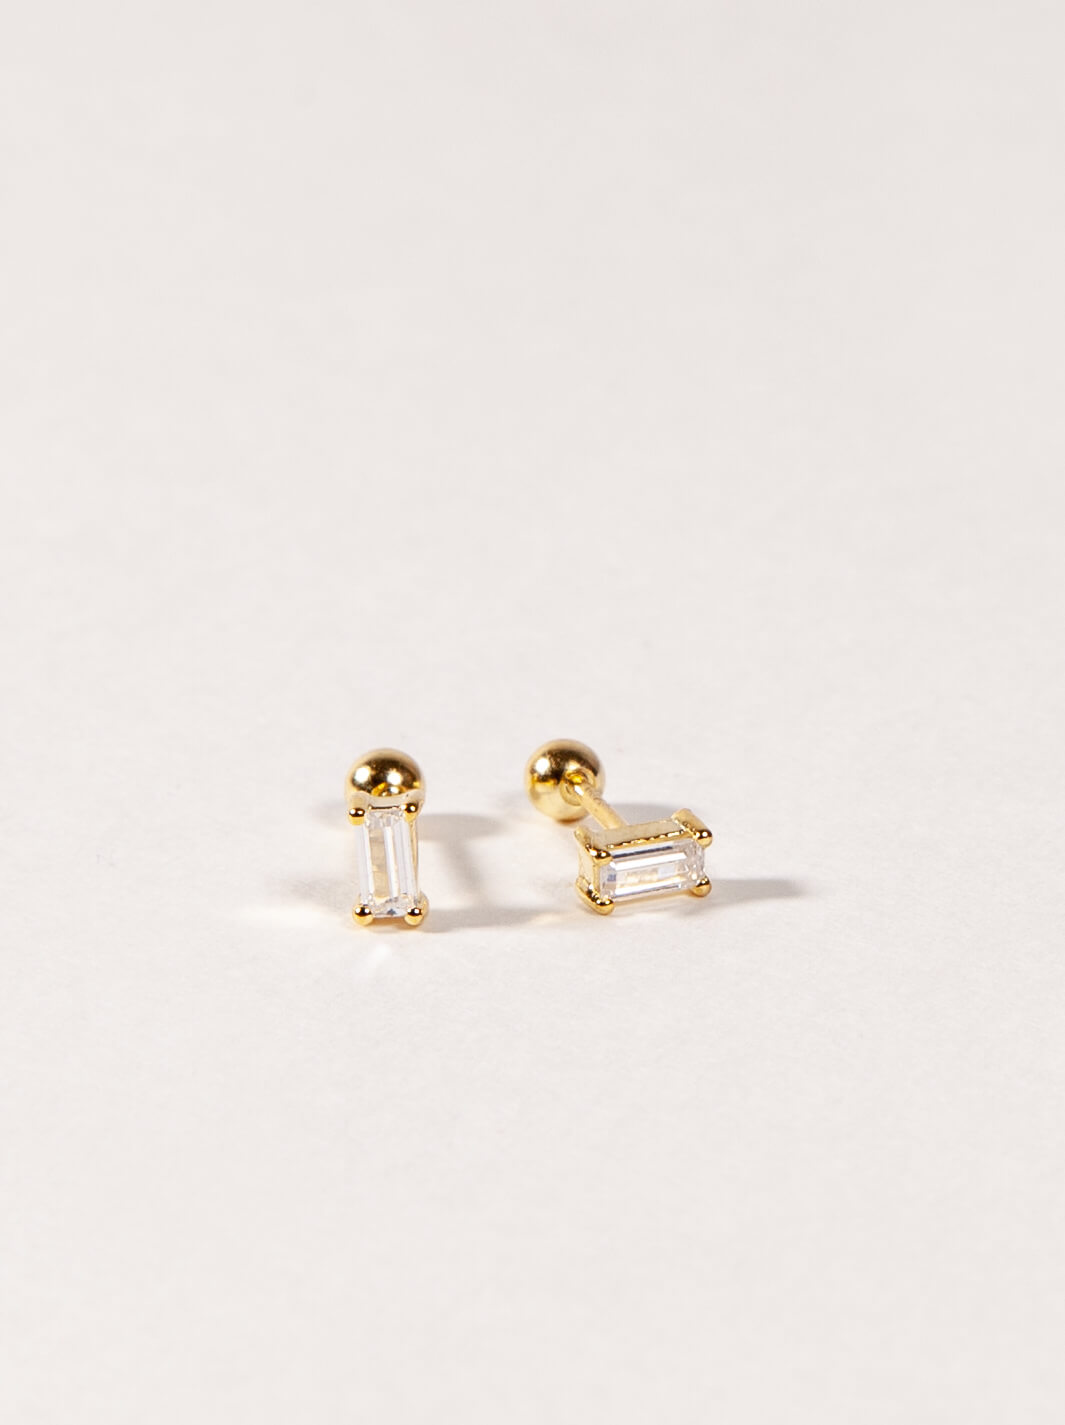 Baguette Studs with Ball Back